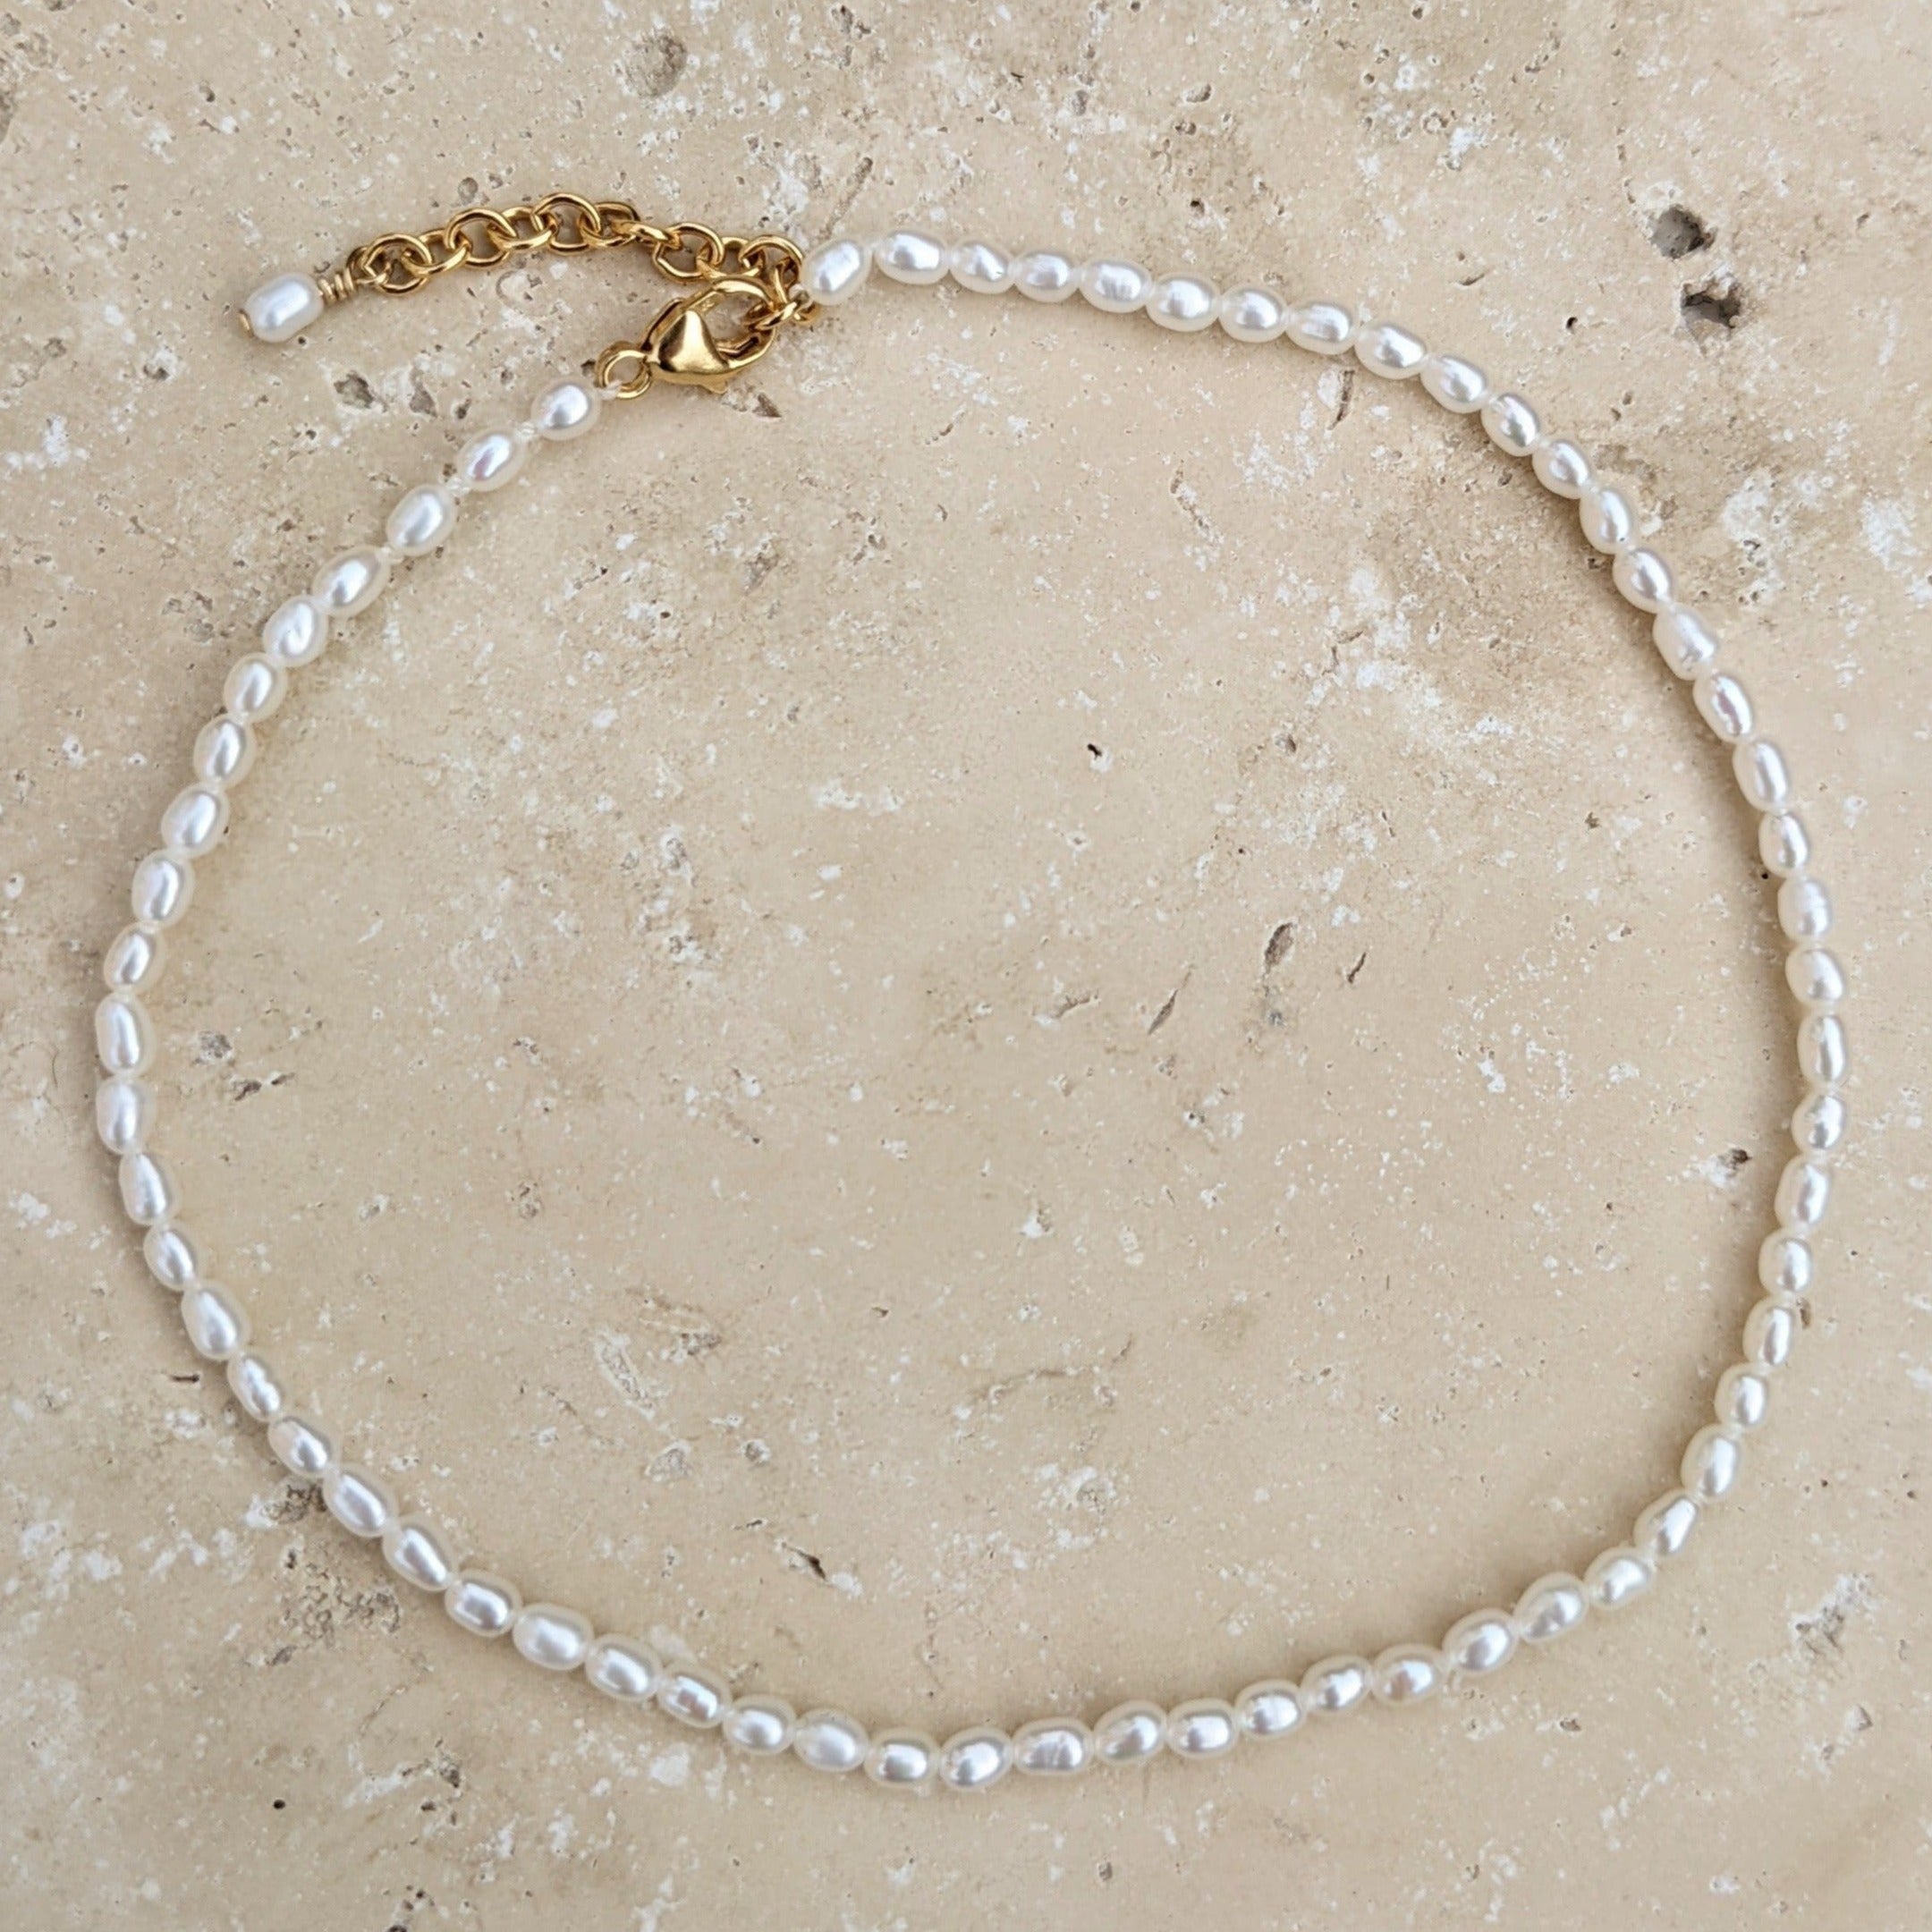 Freshwater seed pearl anklet with a gold adjustable clasp